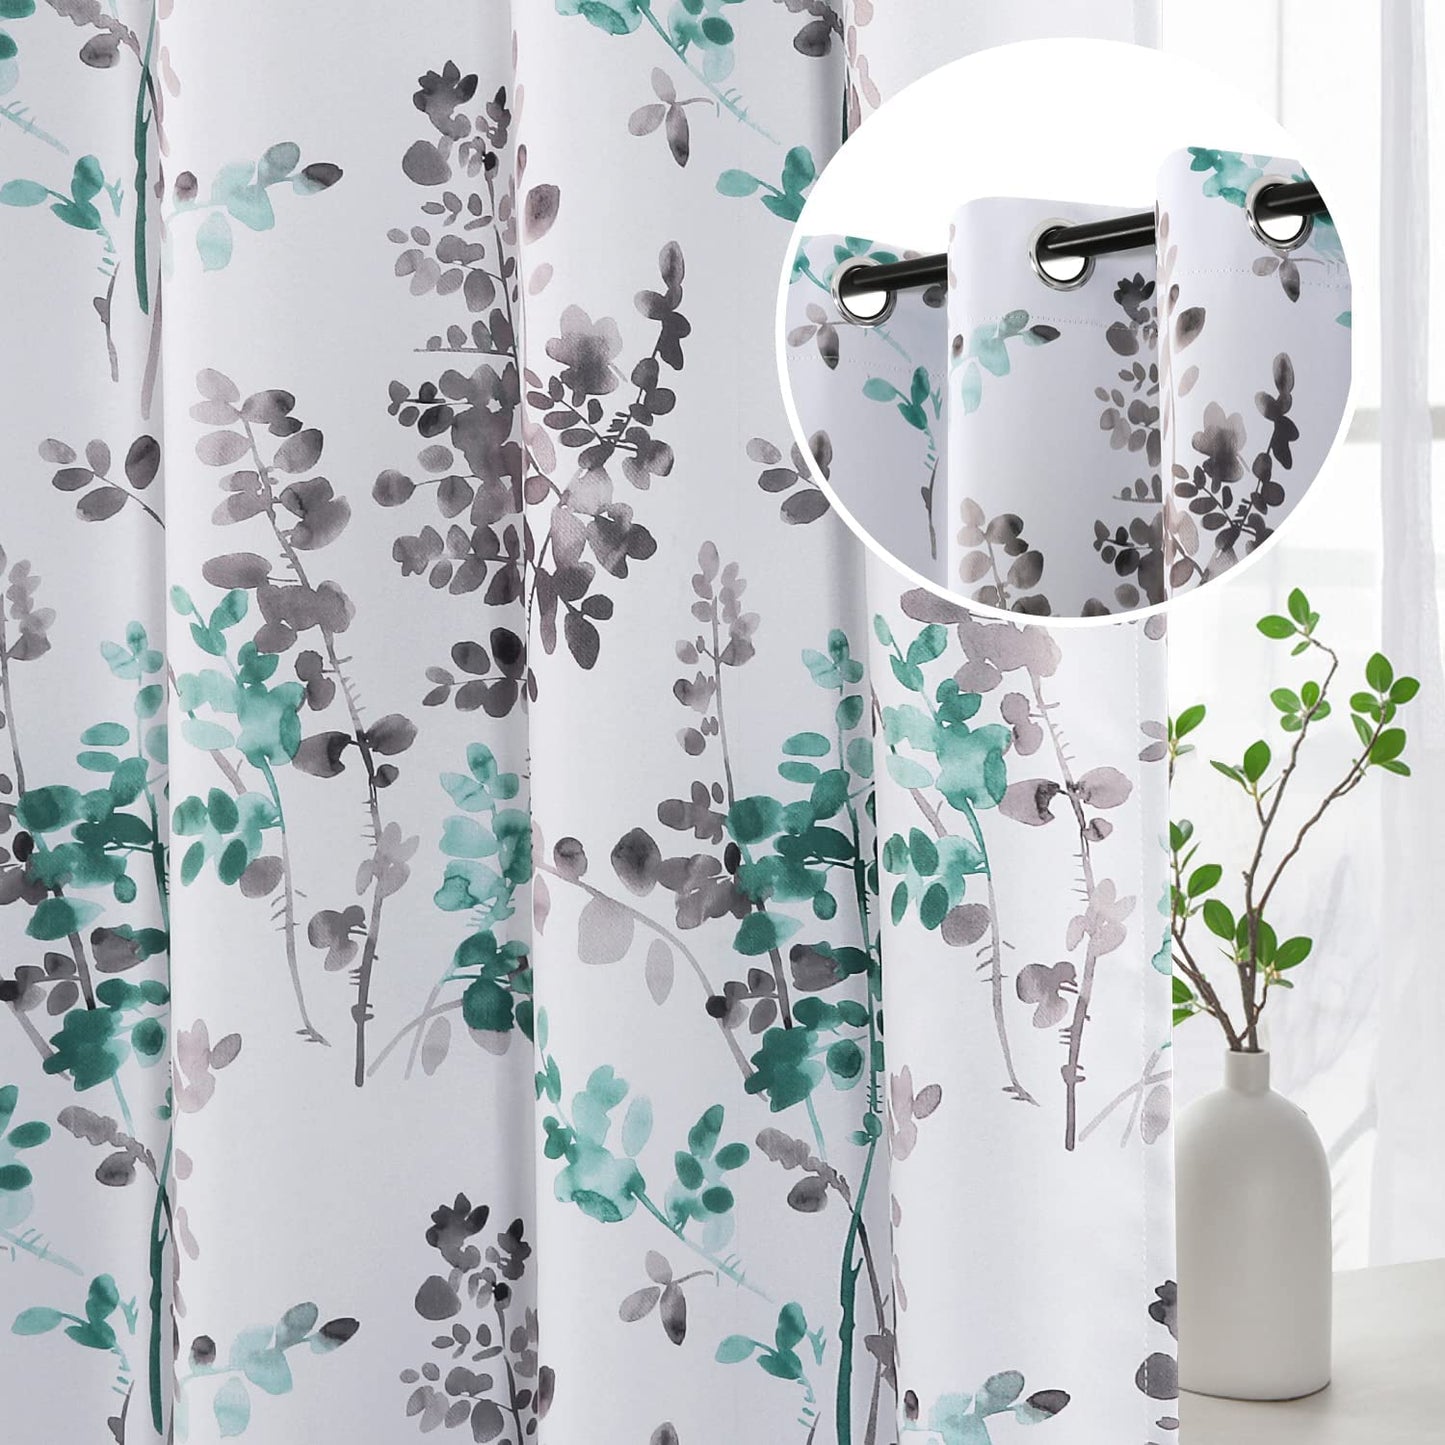 H.VERSAILTEX Blackout Curtains 45 Inch Length 2 Panels Set Room Darkening Thermal Curtains for Bedroom Sound Proof Grommet Floral Curtains, Bluestone and Taupe Vintage Classical Floral Printing  H.VERSAILTEX Grey/Turquoise 52"W X 84"L 